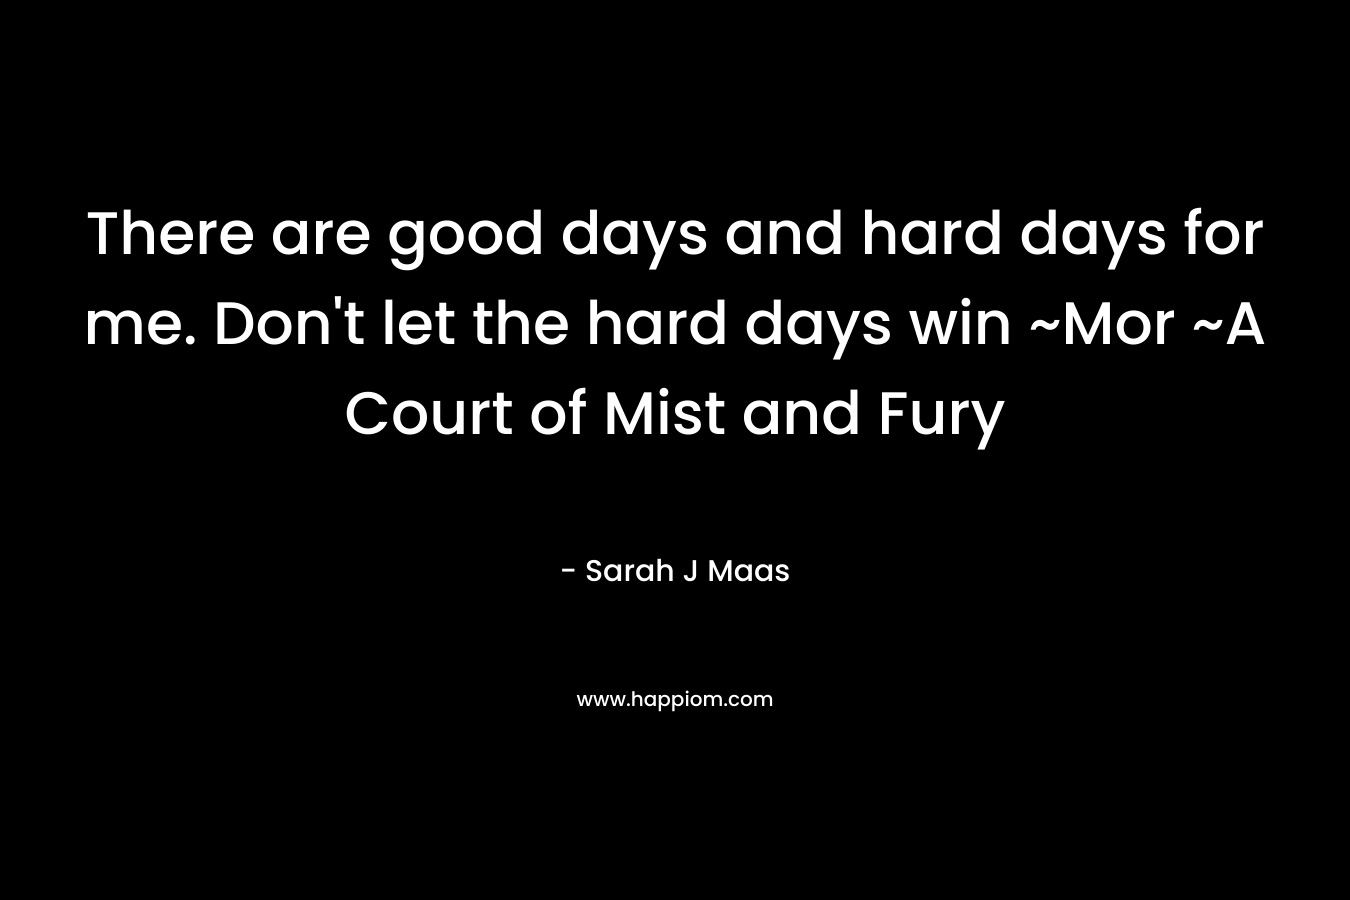 There are good days and hard days for me. Don't let the hard days win ~Mor ~A Court of Mist and Fury